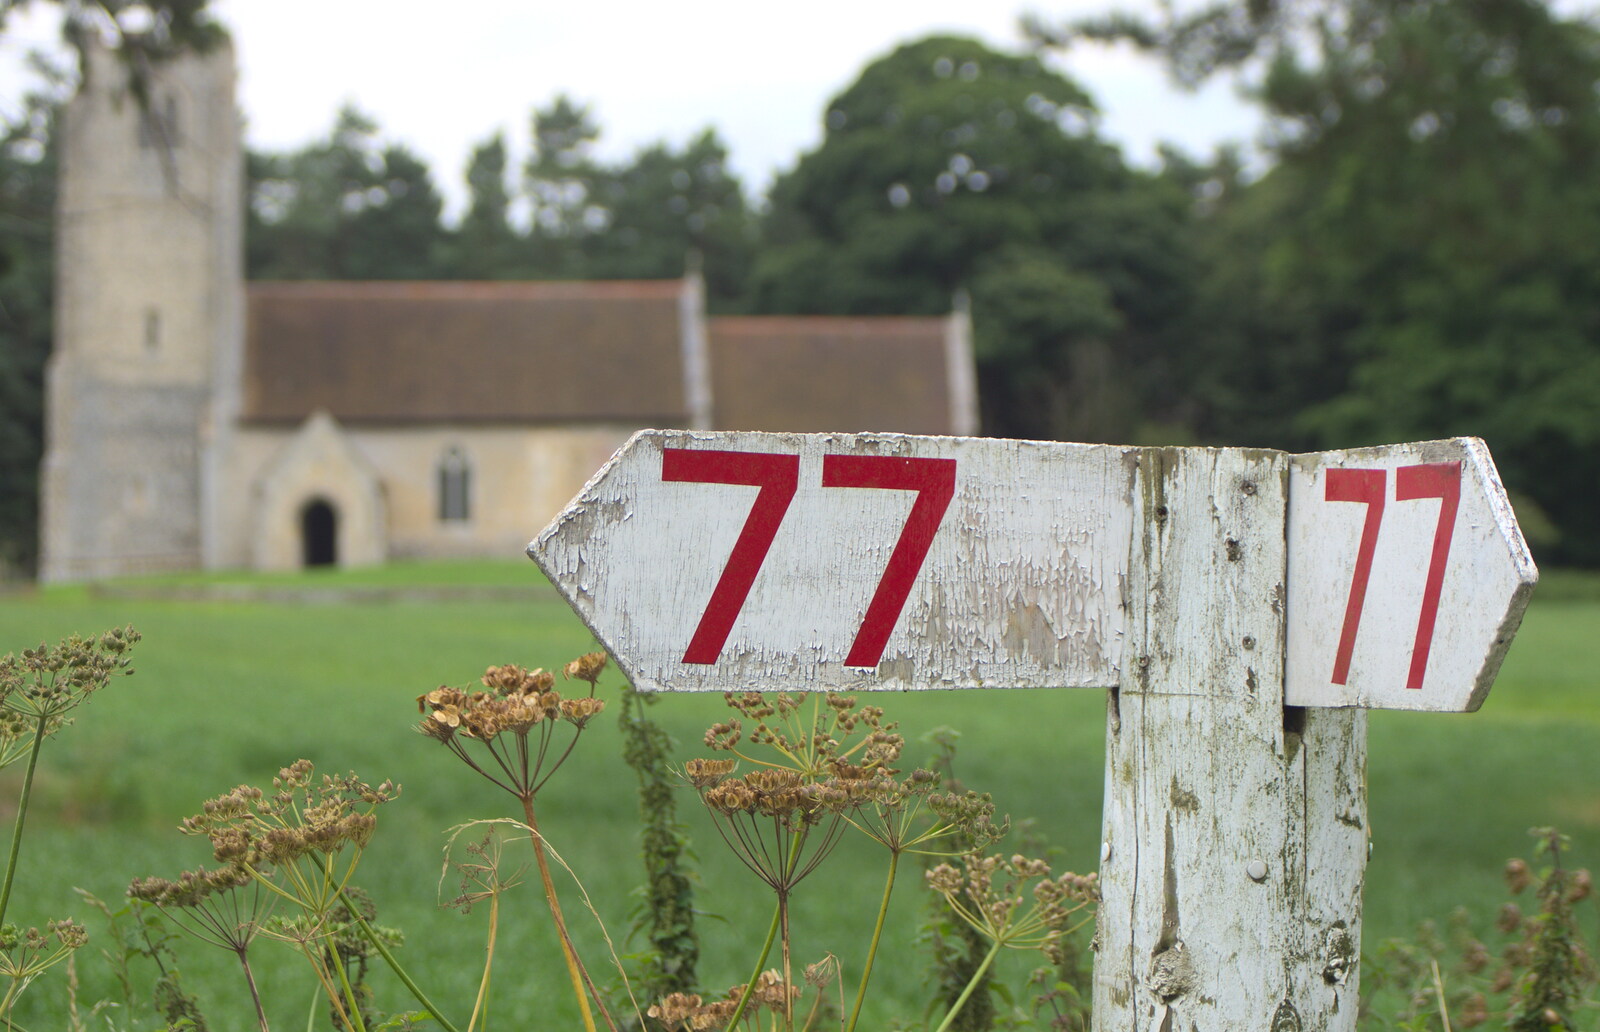 Route 77 - not quite the same as Route 66 from Camping at Dower House, West Harling, Norfolk - 1st September 2012